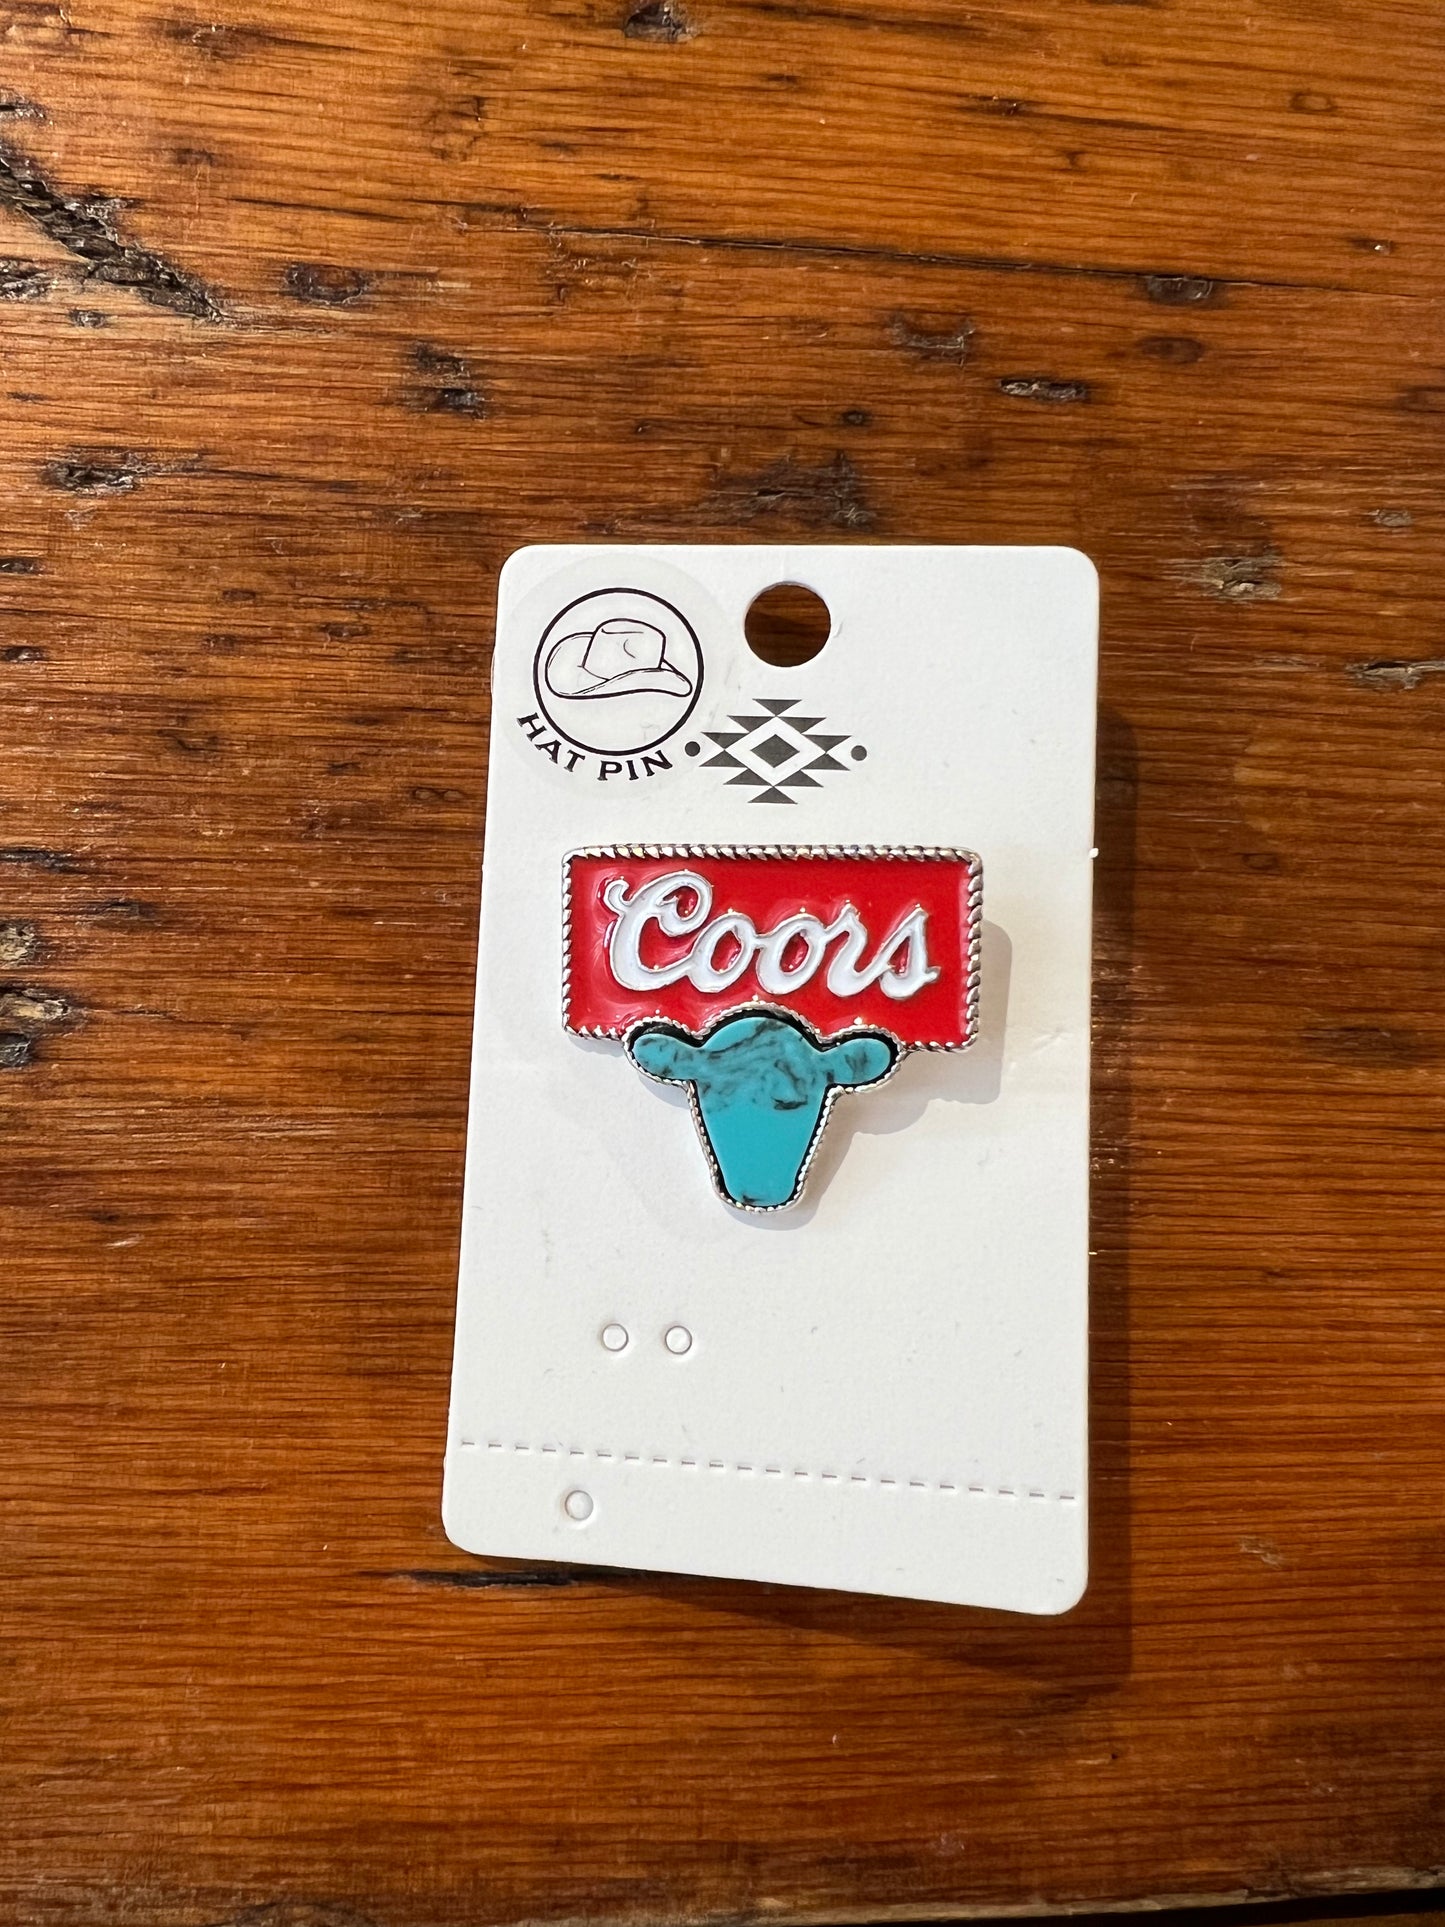 Coors Cattle Hat Pin